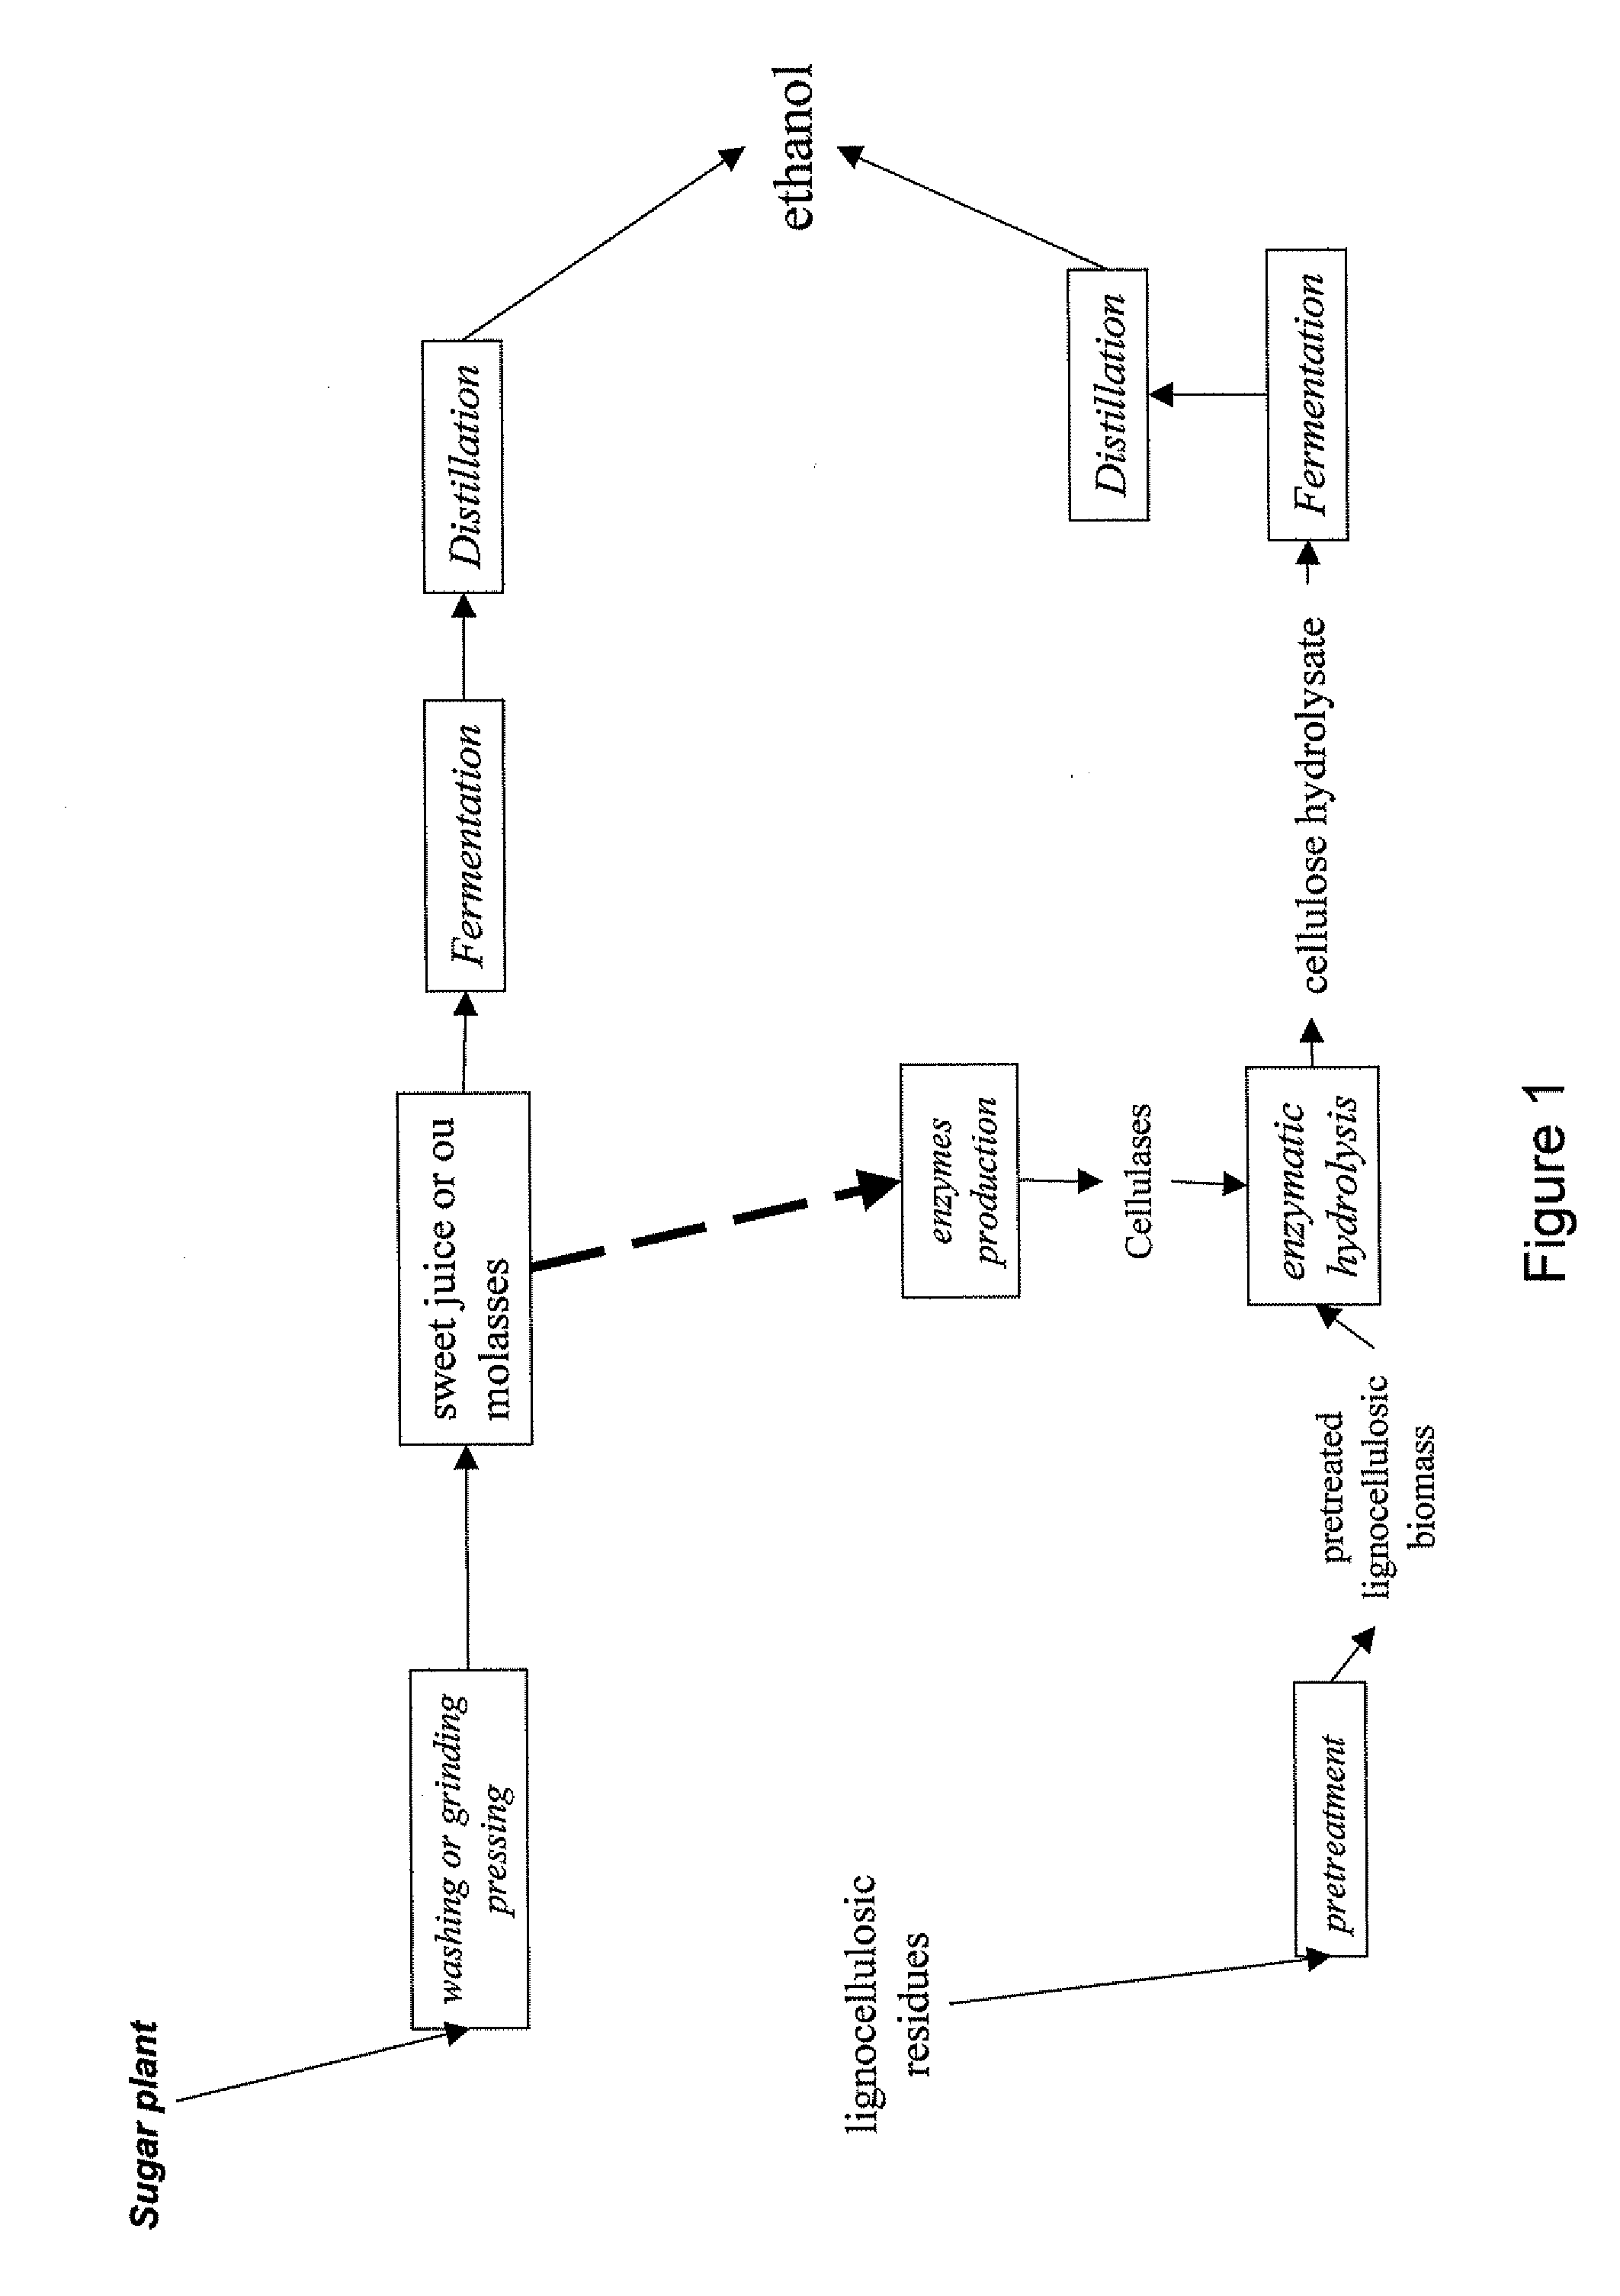 Method of producing alcohol in the biorefinery context